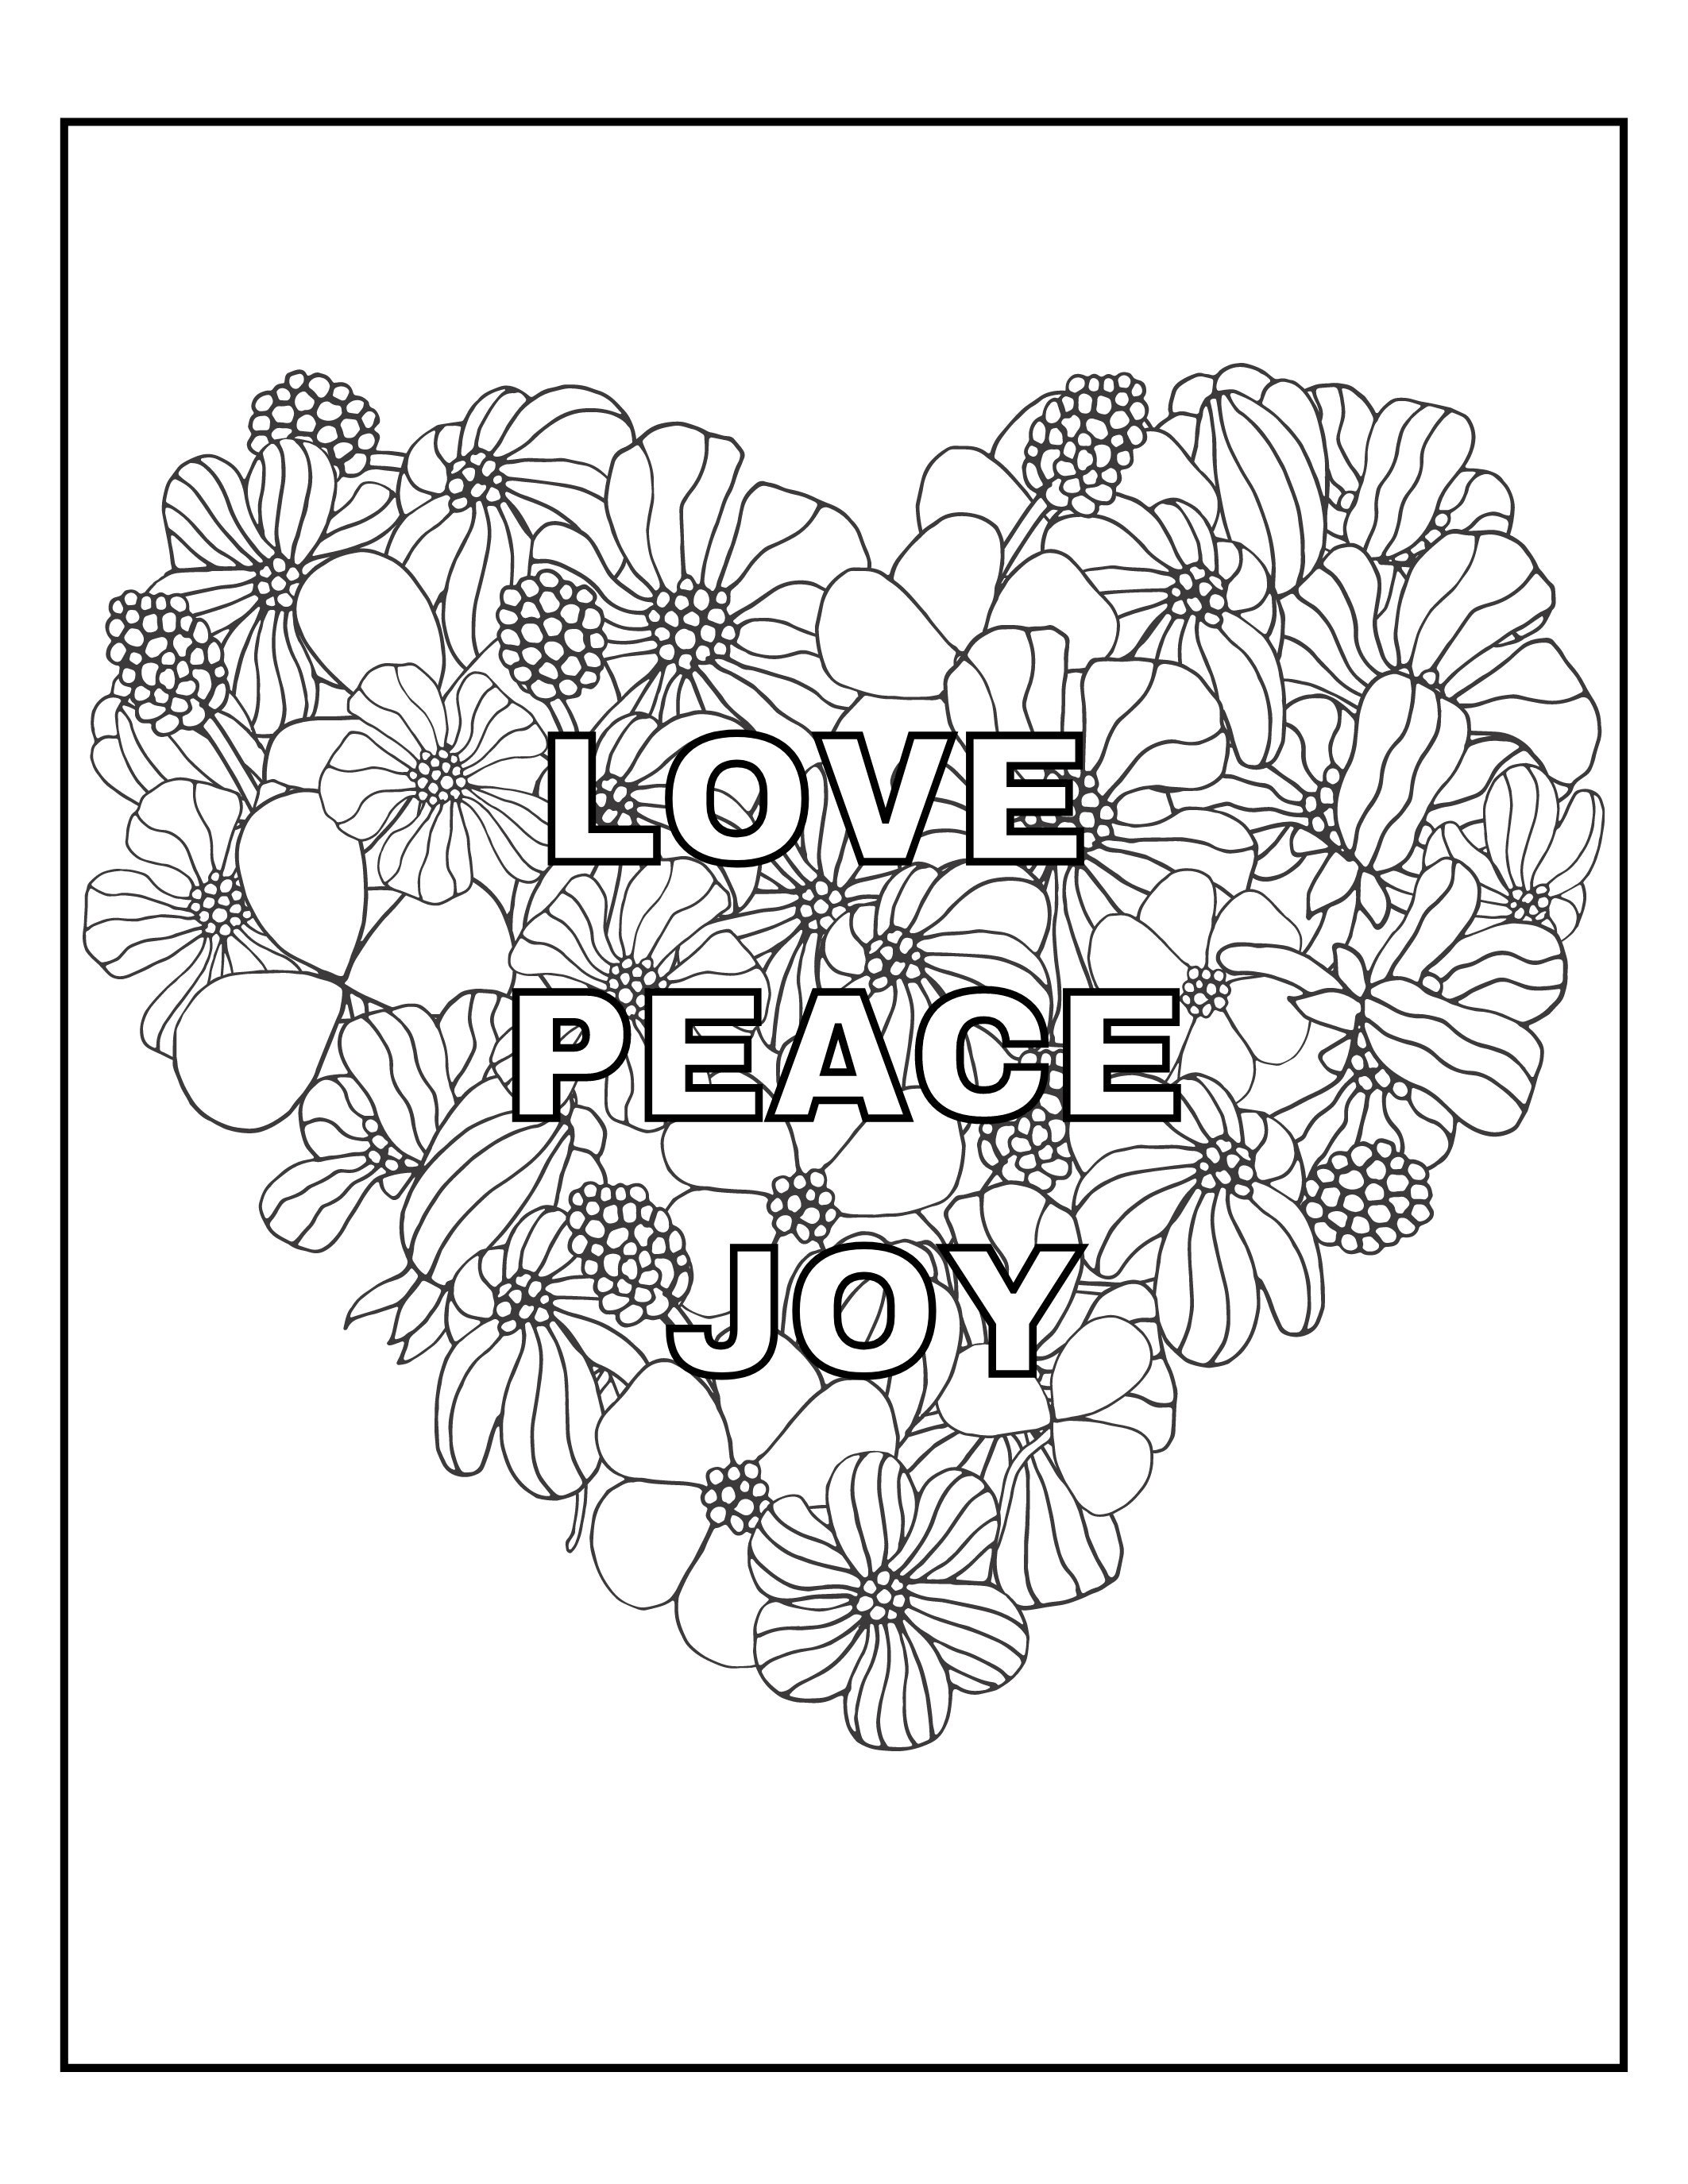 Hope, Peace, Joy, and Love Coloring Posters — Illustrated Ministry